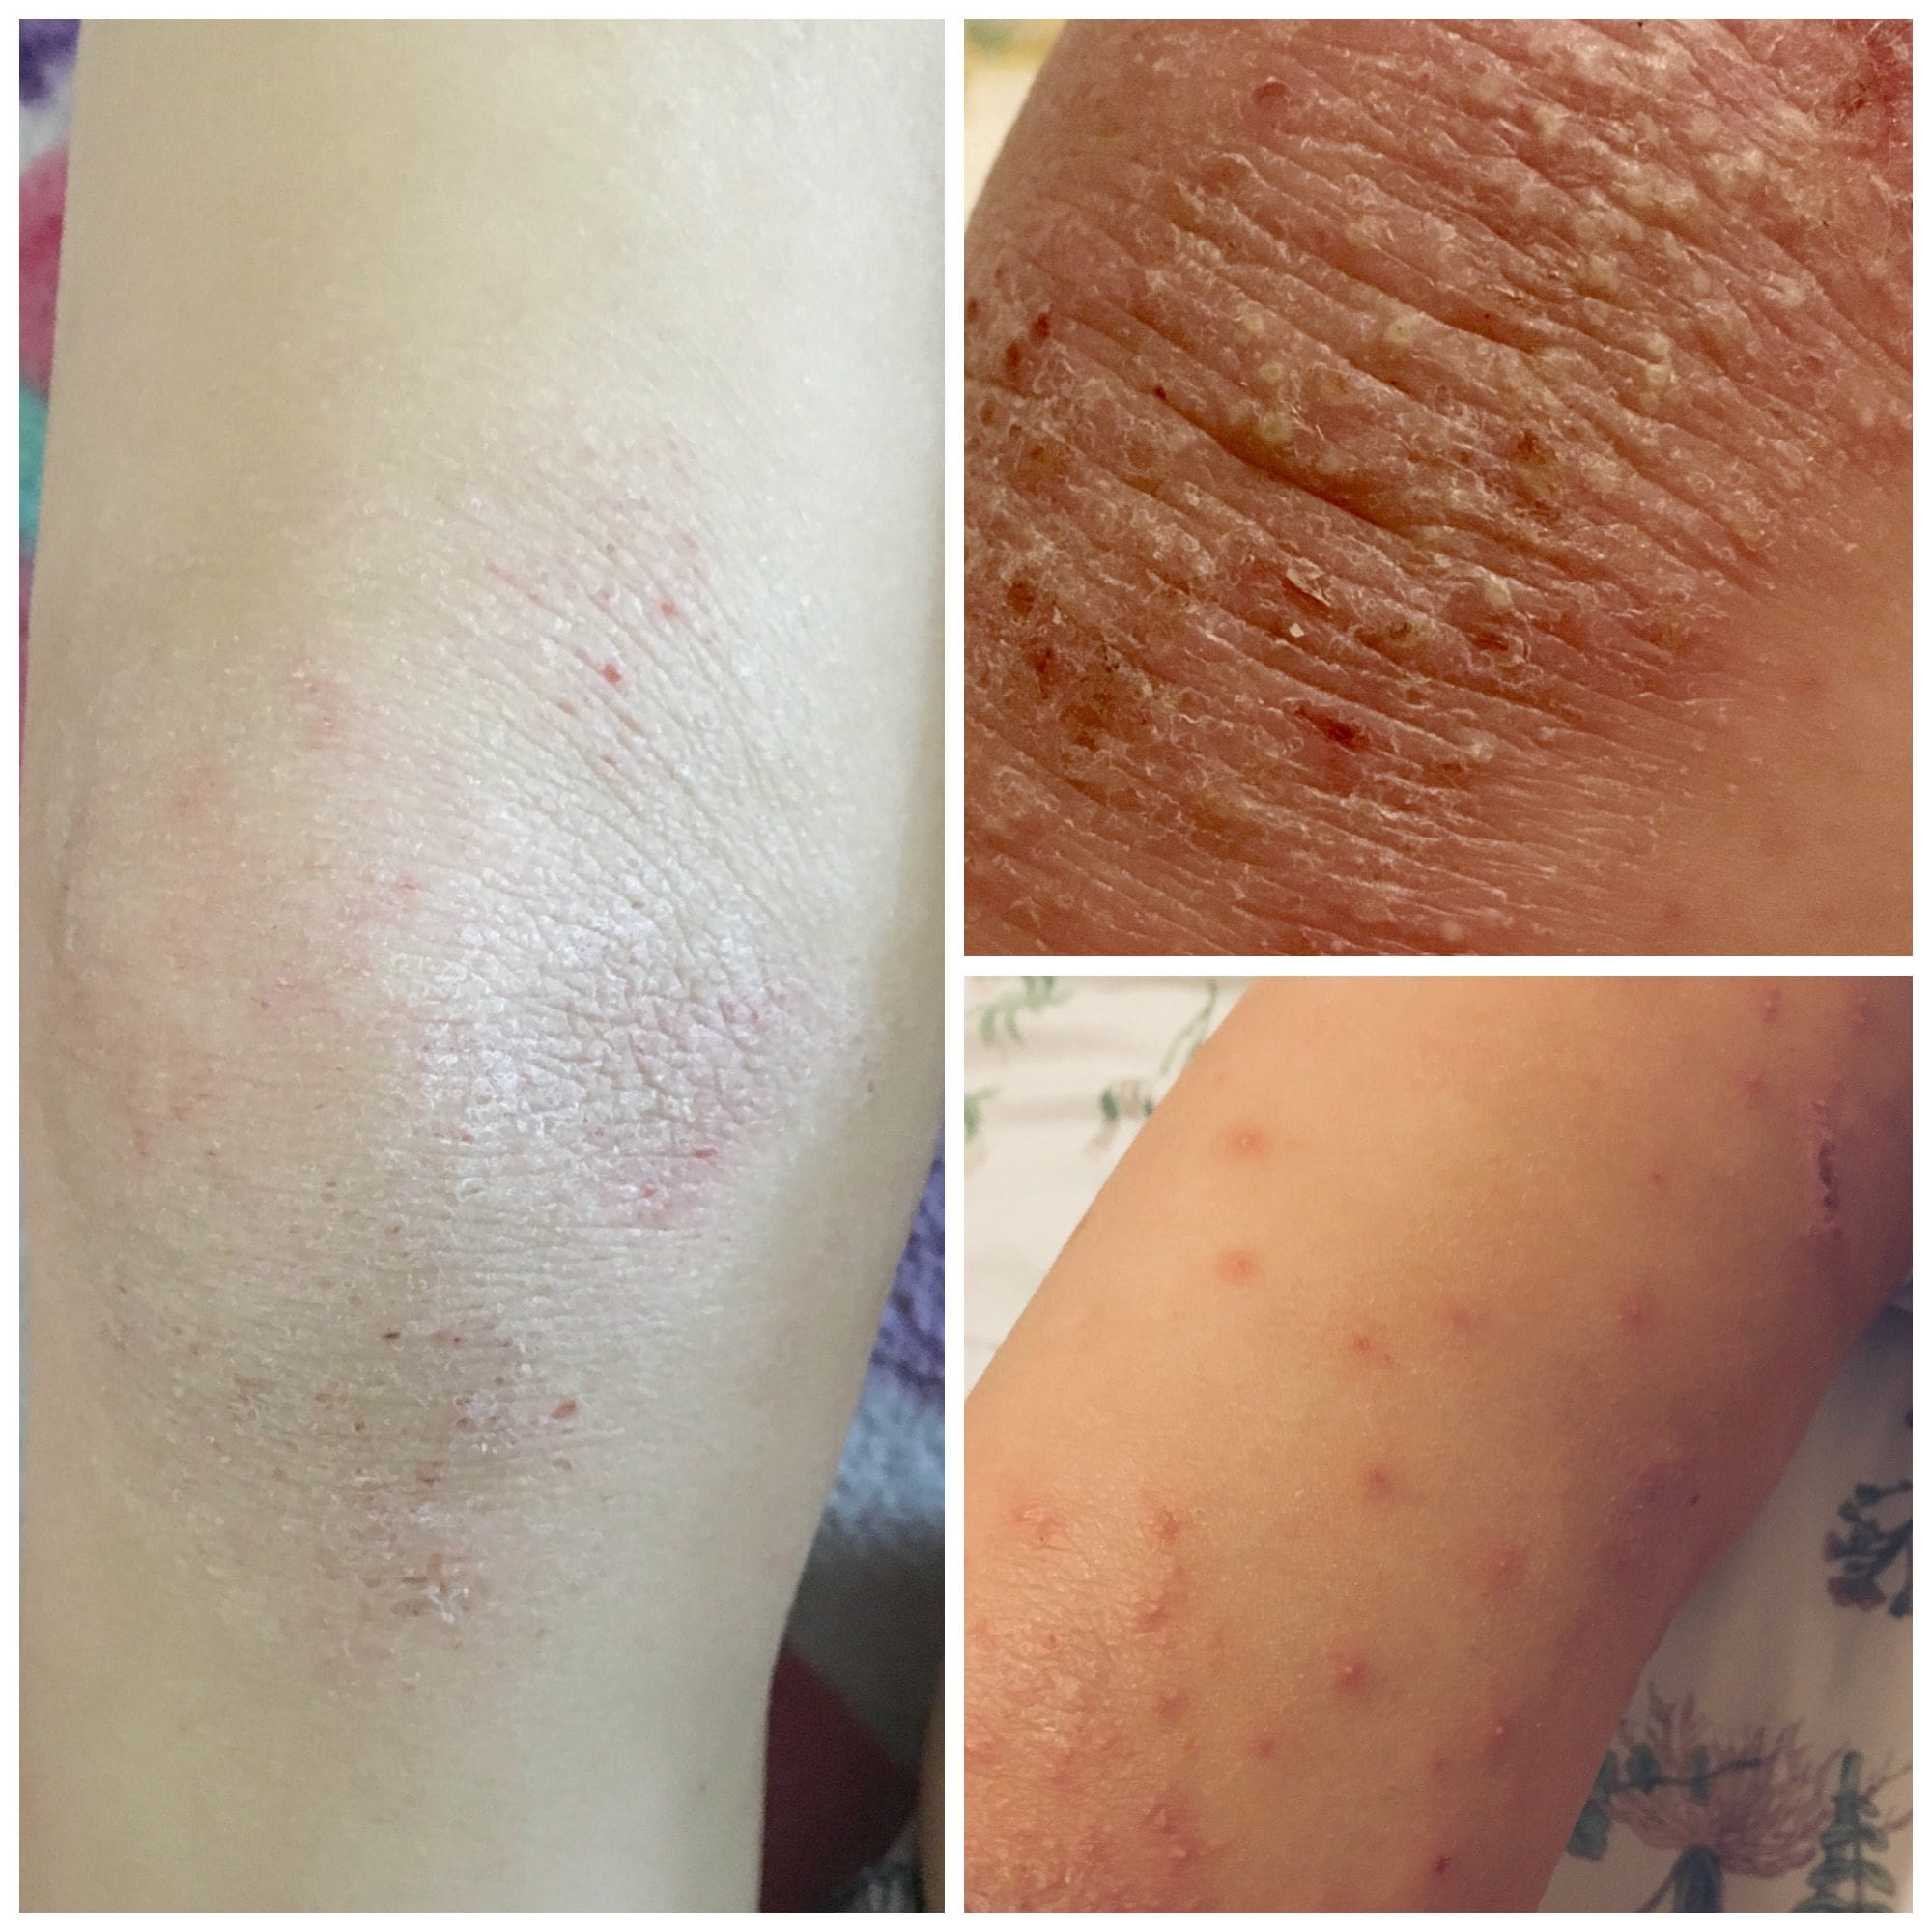 Ivy, Eczema, and a Bacterial Infection